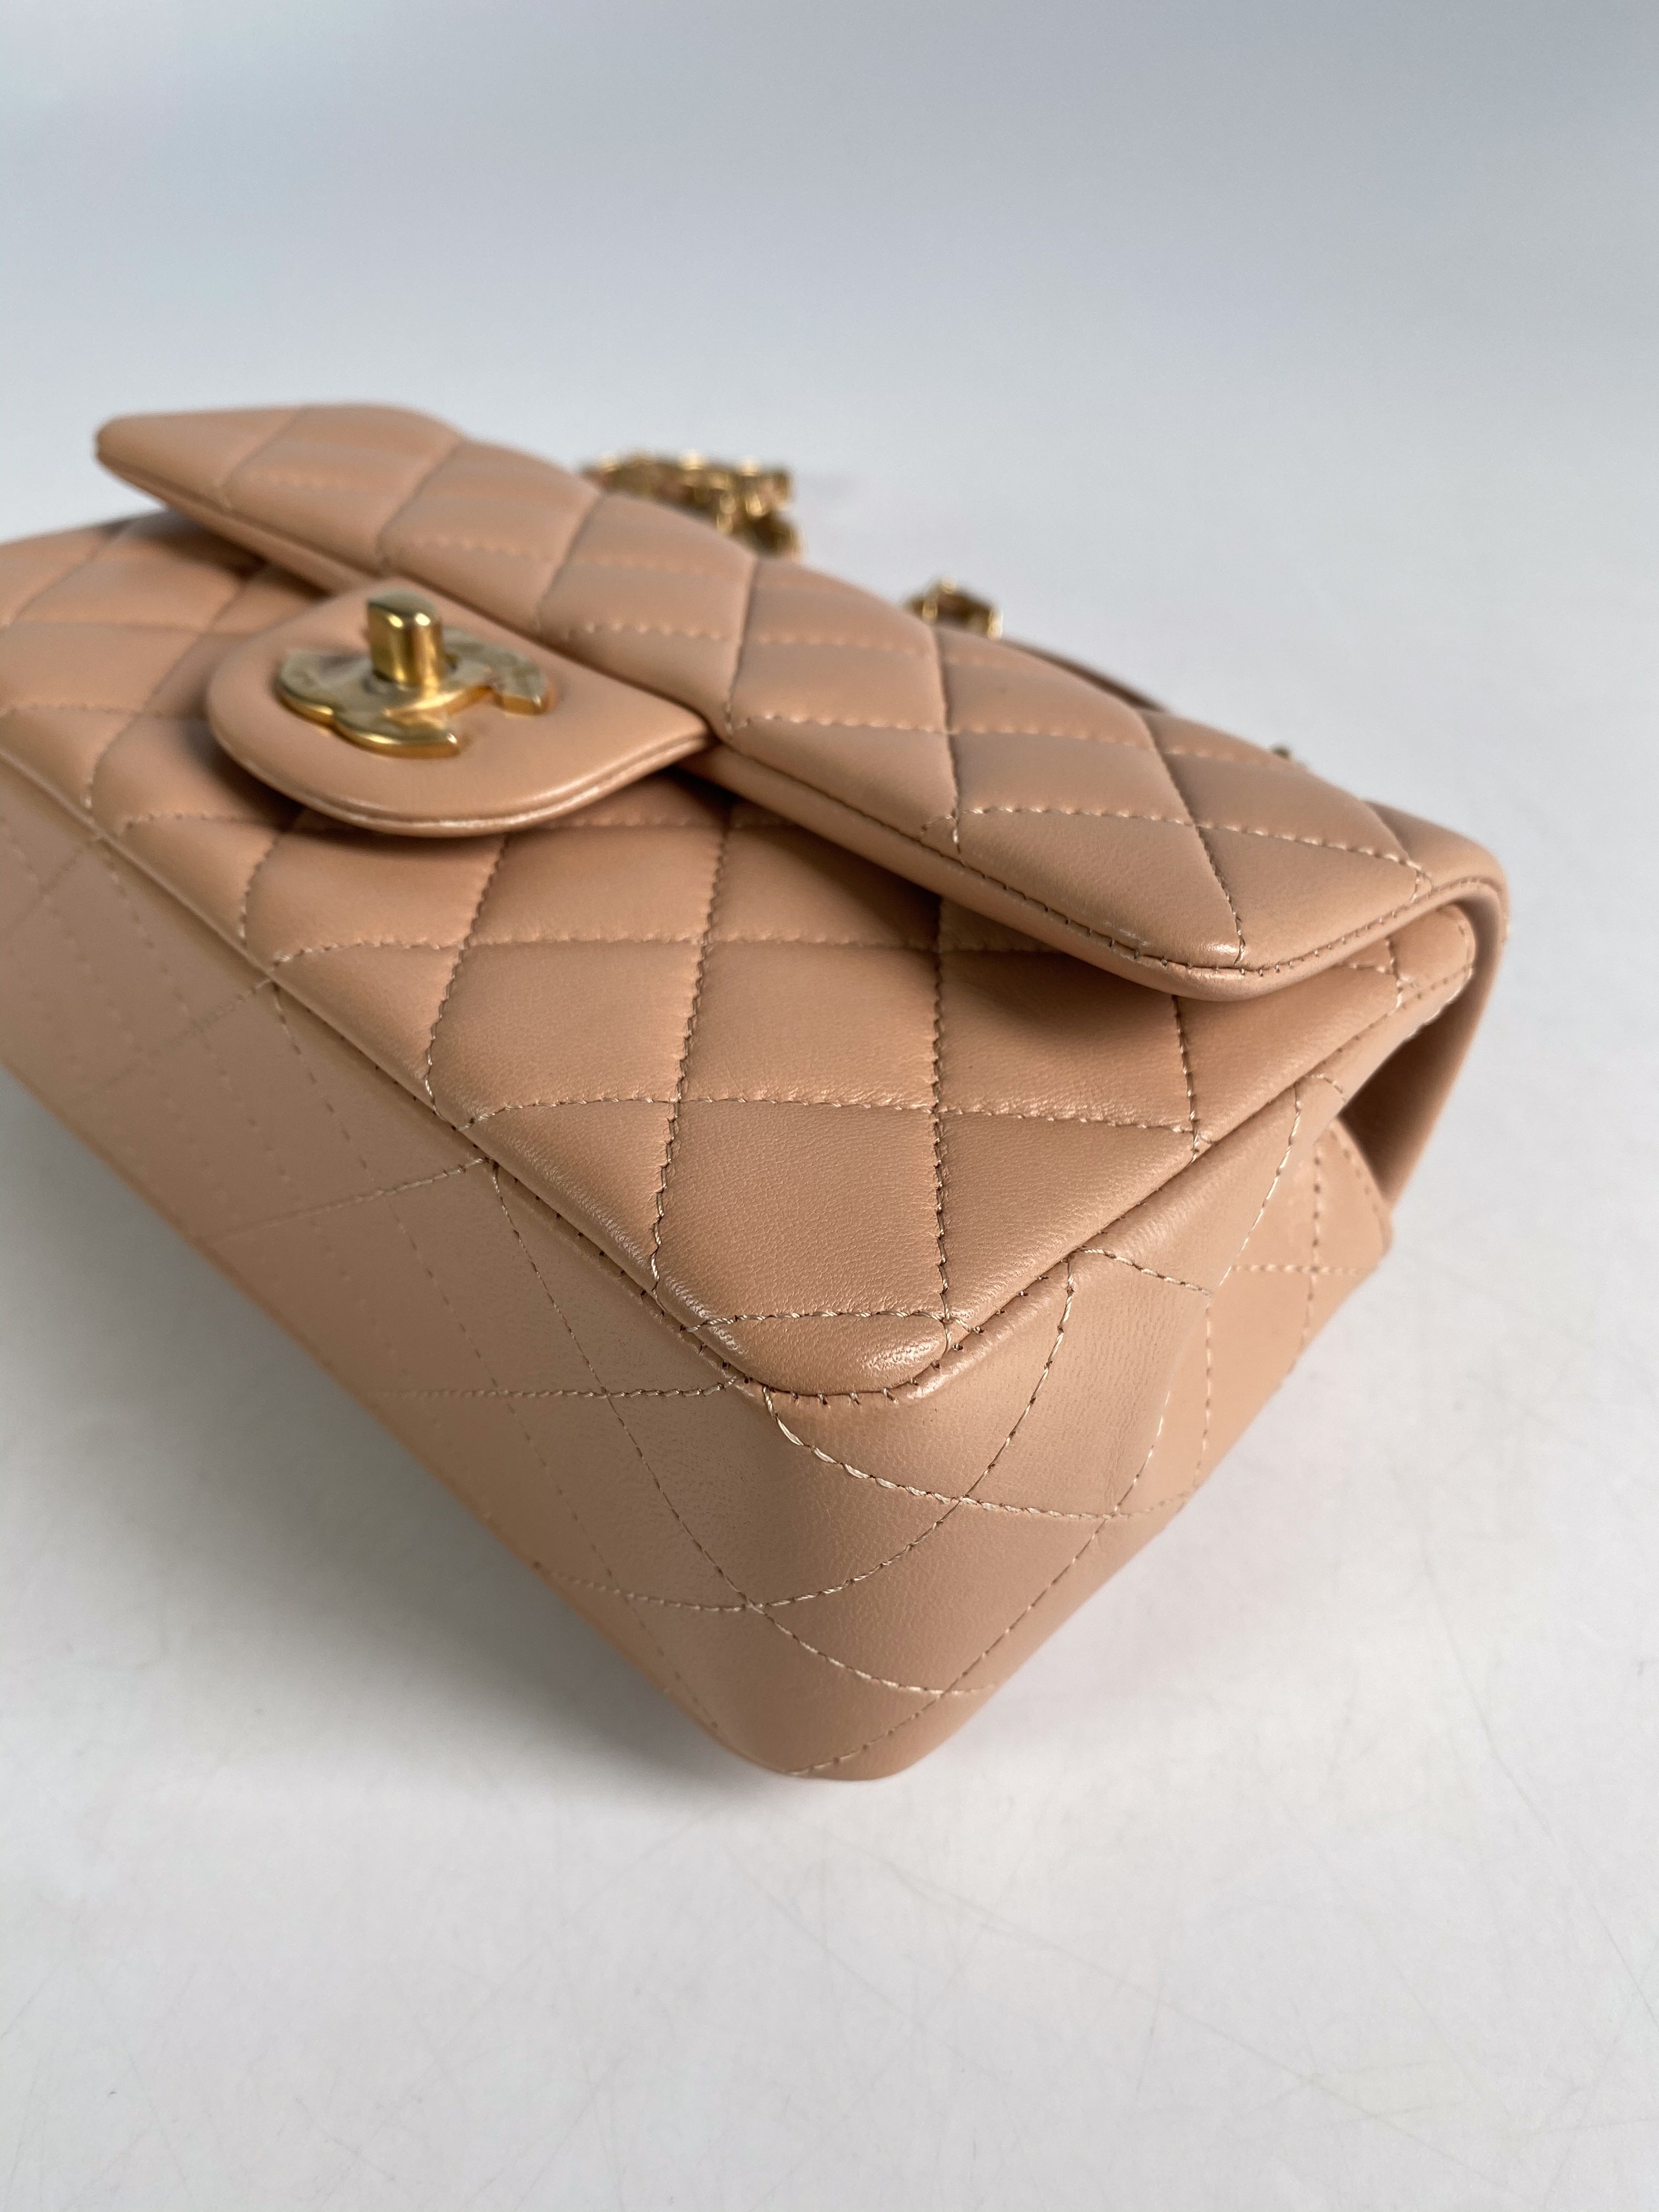 Chanel Mini Rectangle Top Handle 21A Beige Lambskin in Aged Gold Hardware (Microchip)